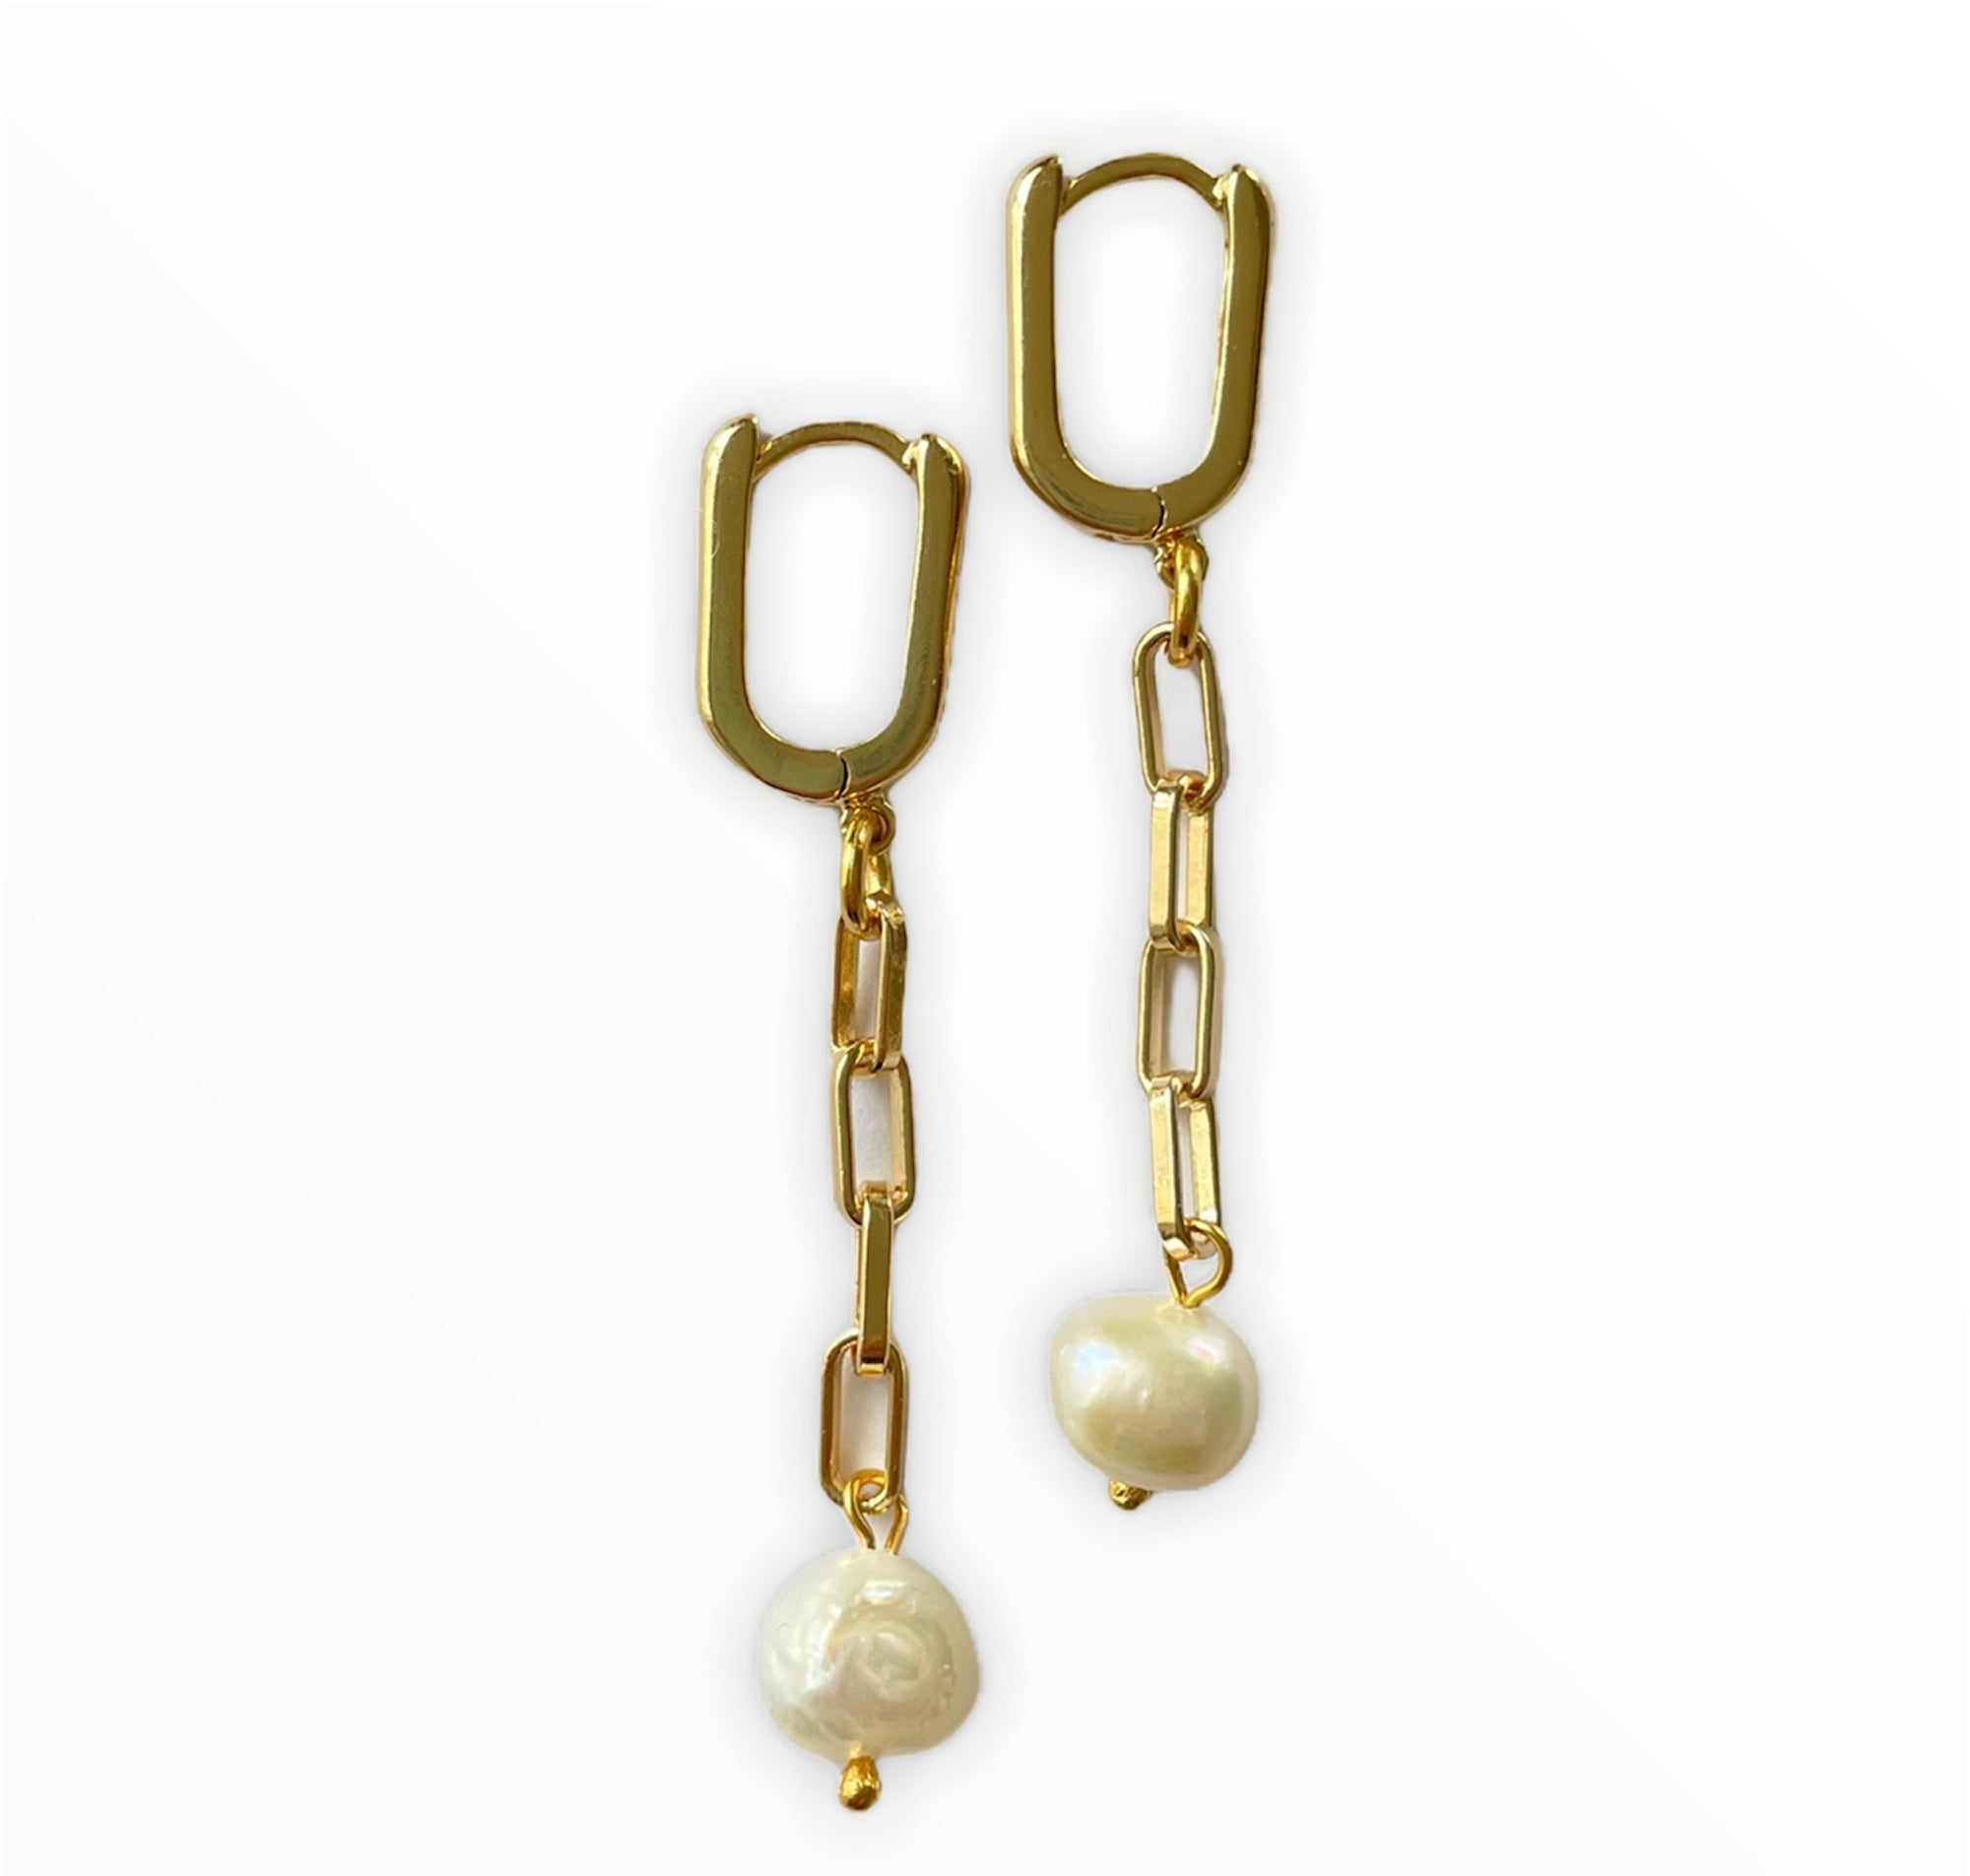 3 inch gold plated drop earrings with a linked chain and freshwater pearl dropdown